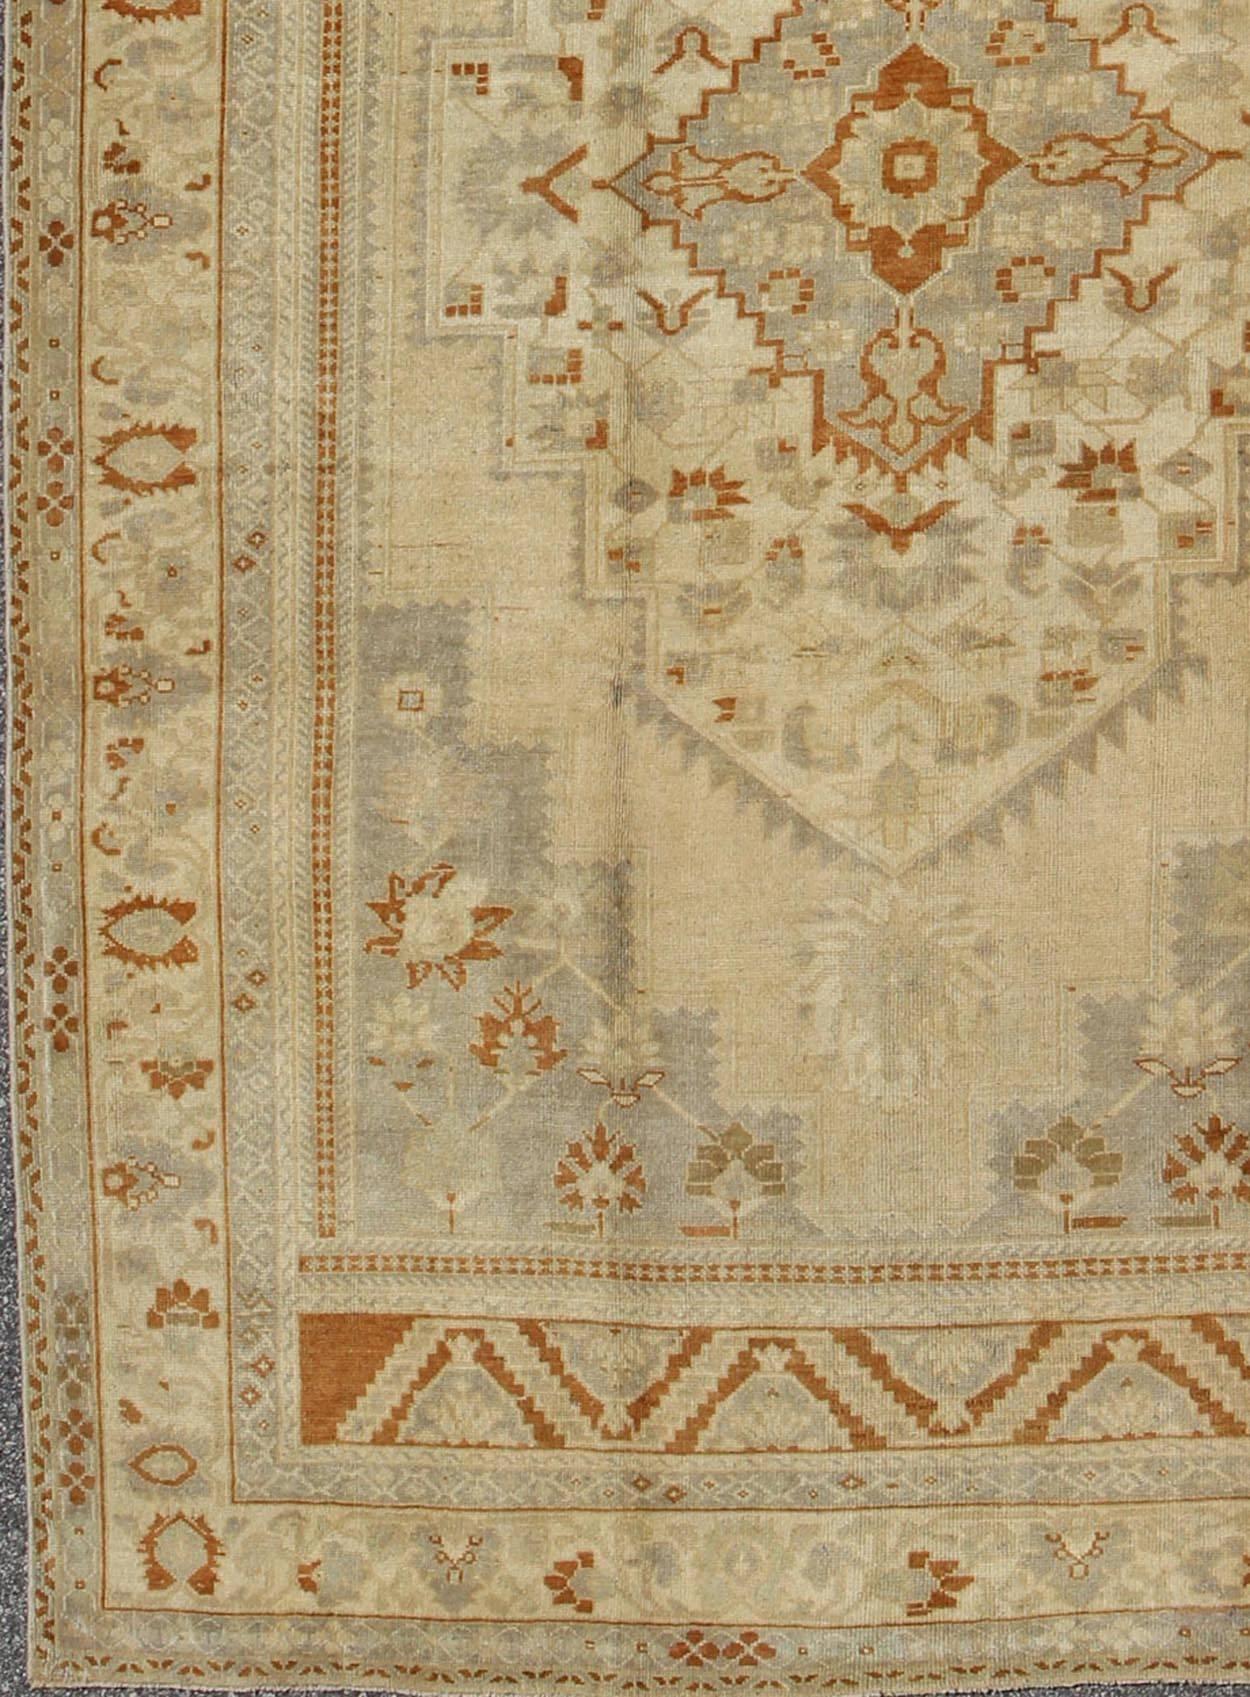 Measures: 6'10'' x 11'3''.
This Oushak carpet (circa mid-20th century) features a multi-layered medallion framed in the central field. Complementary floral designs adorn the surrounding field, cornices and borders. Colors include ivory, light gray,